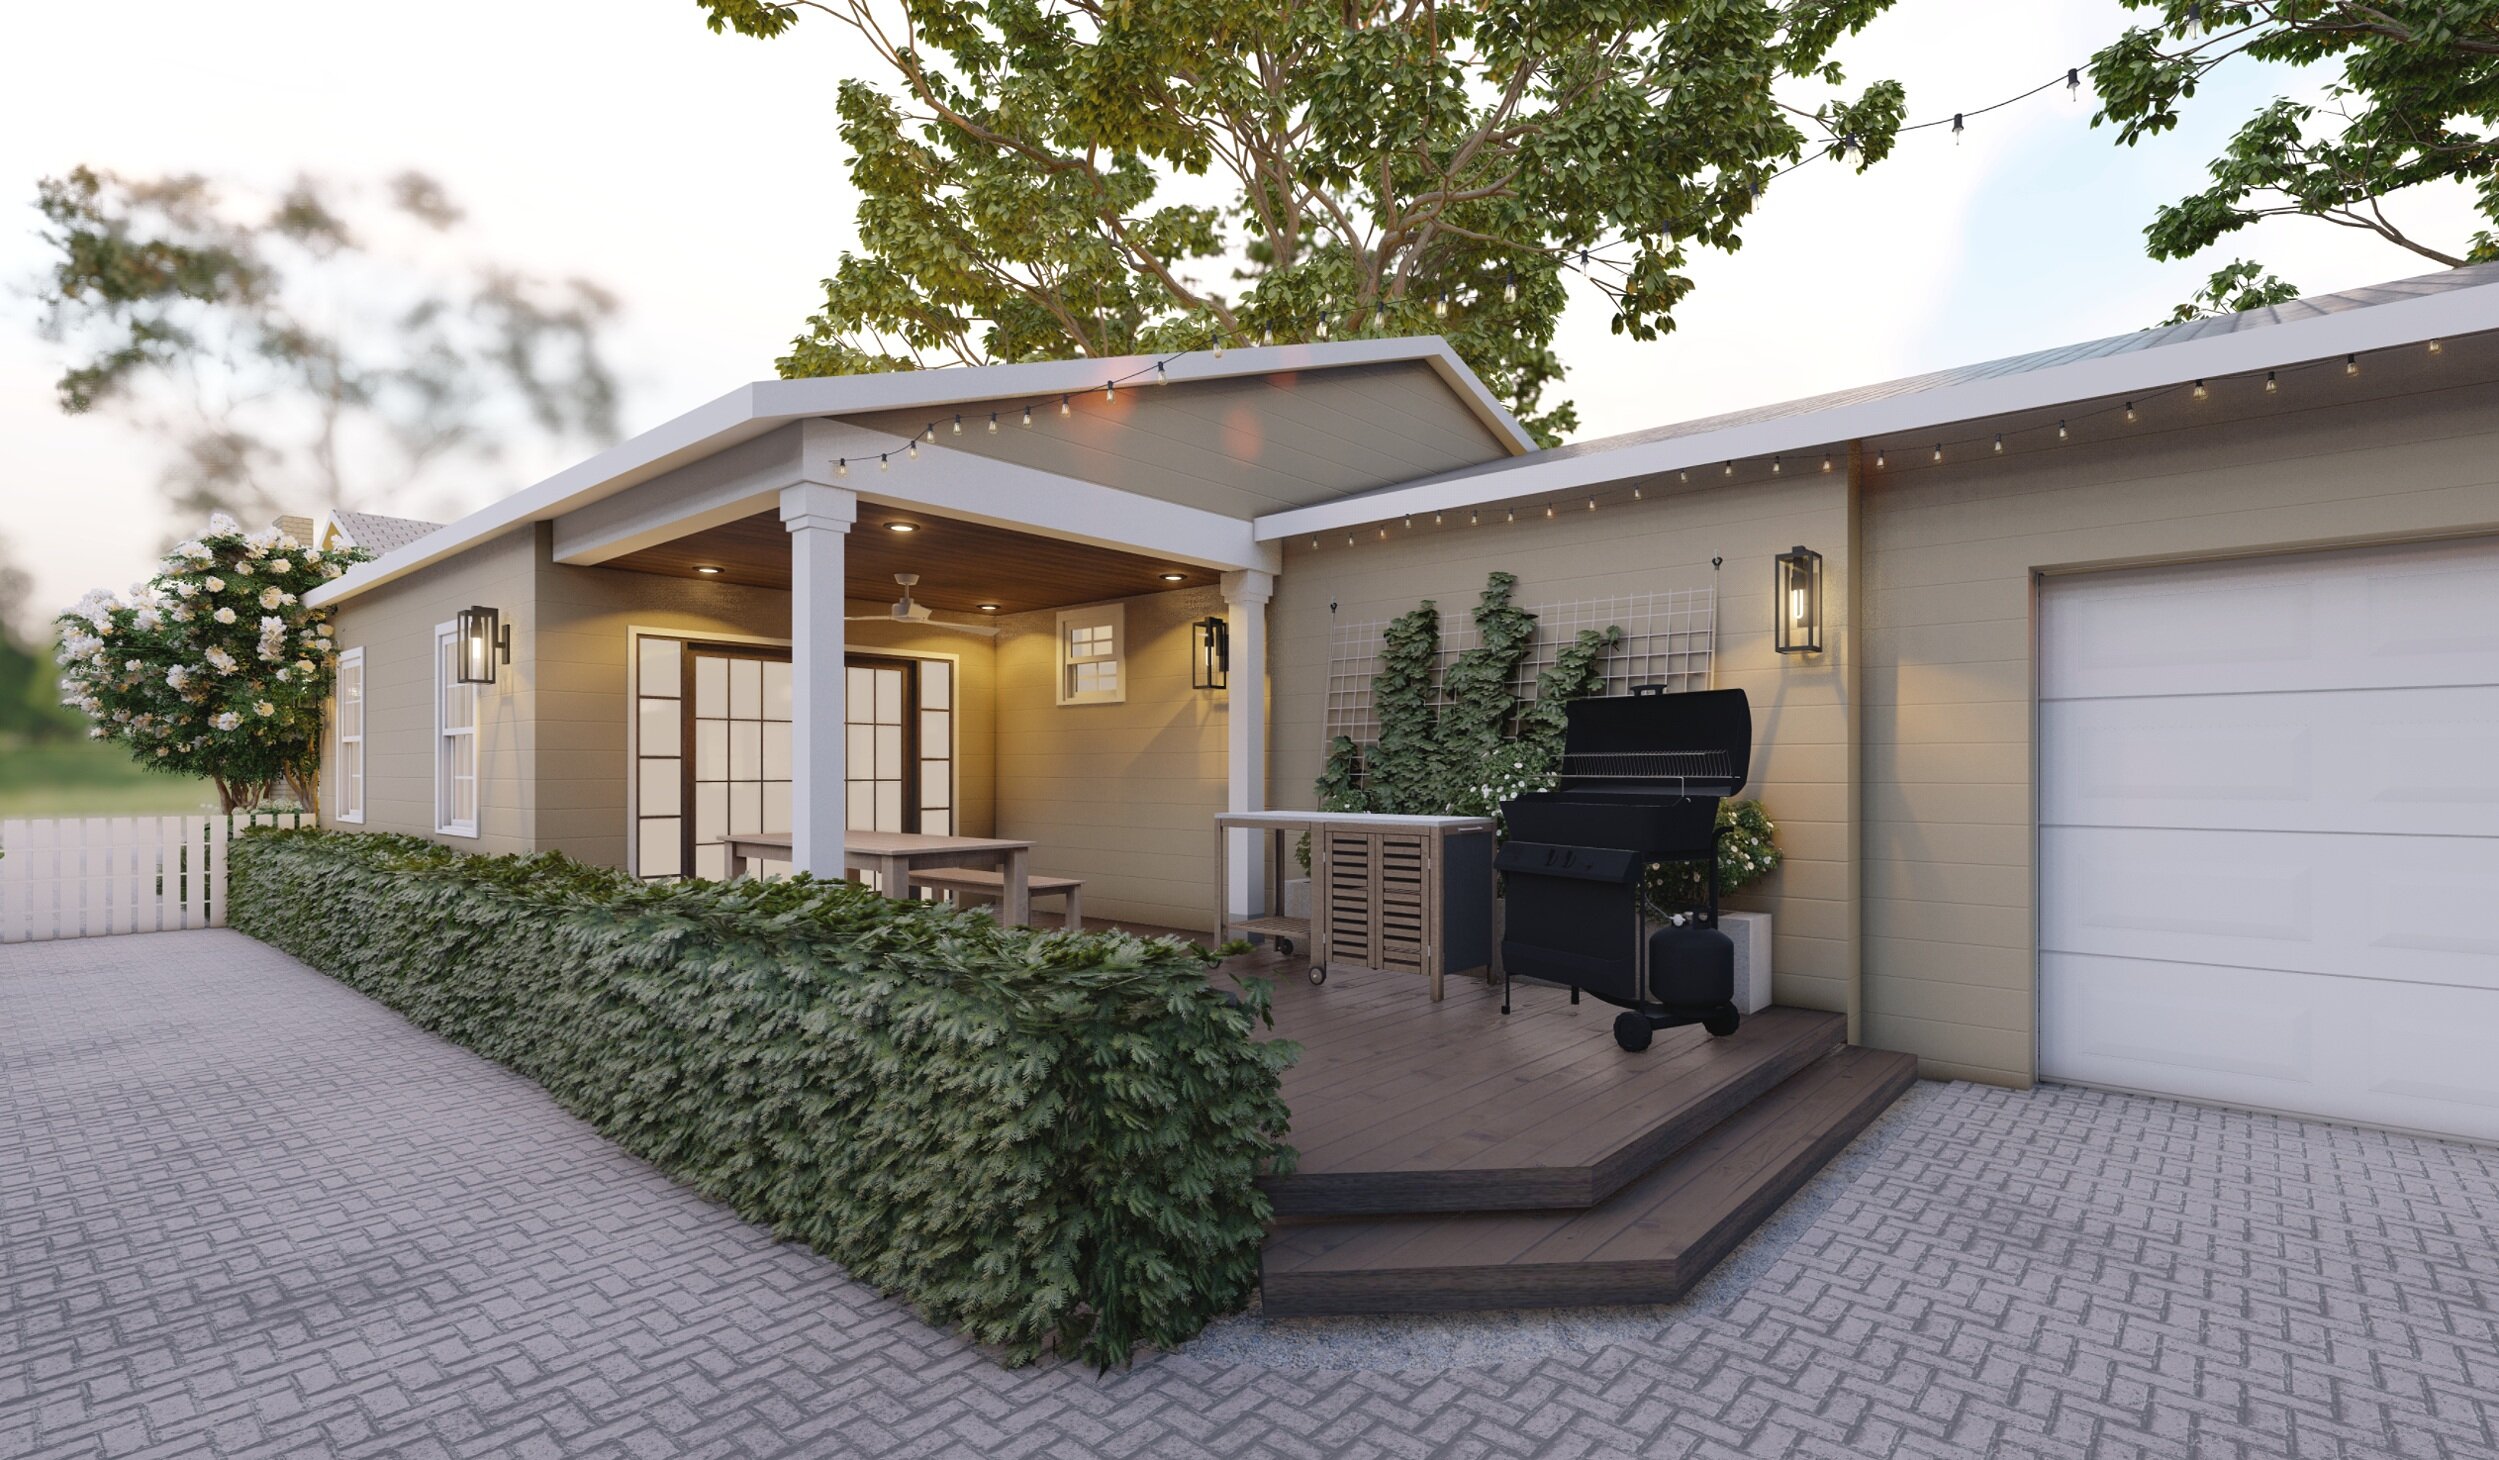 Front yard patio next to garage with dining area and modular outdoor kitchen including a charcoal grill and bar cart.